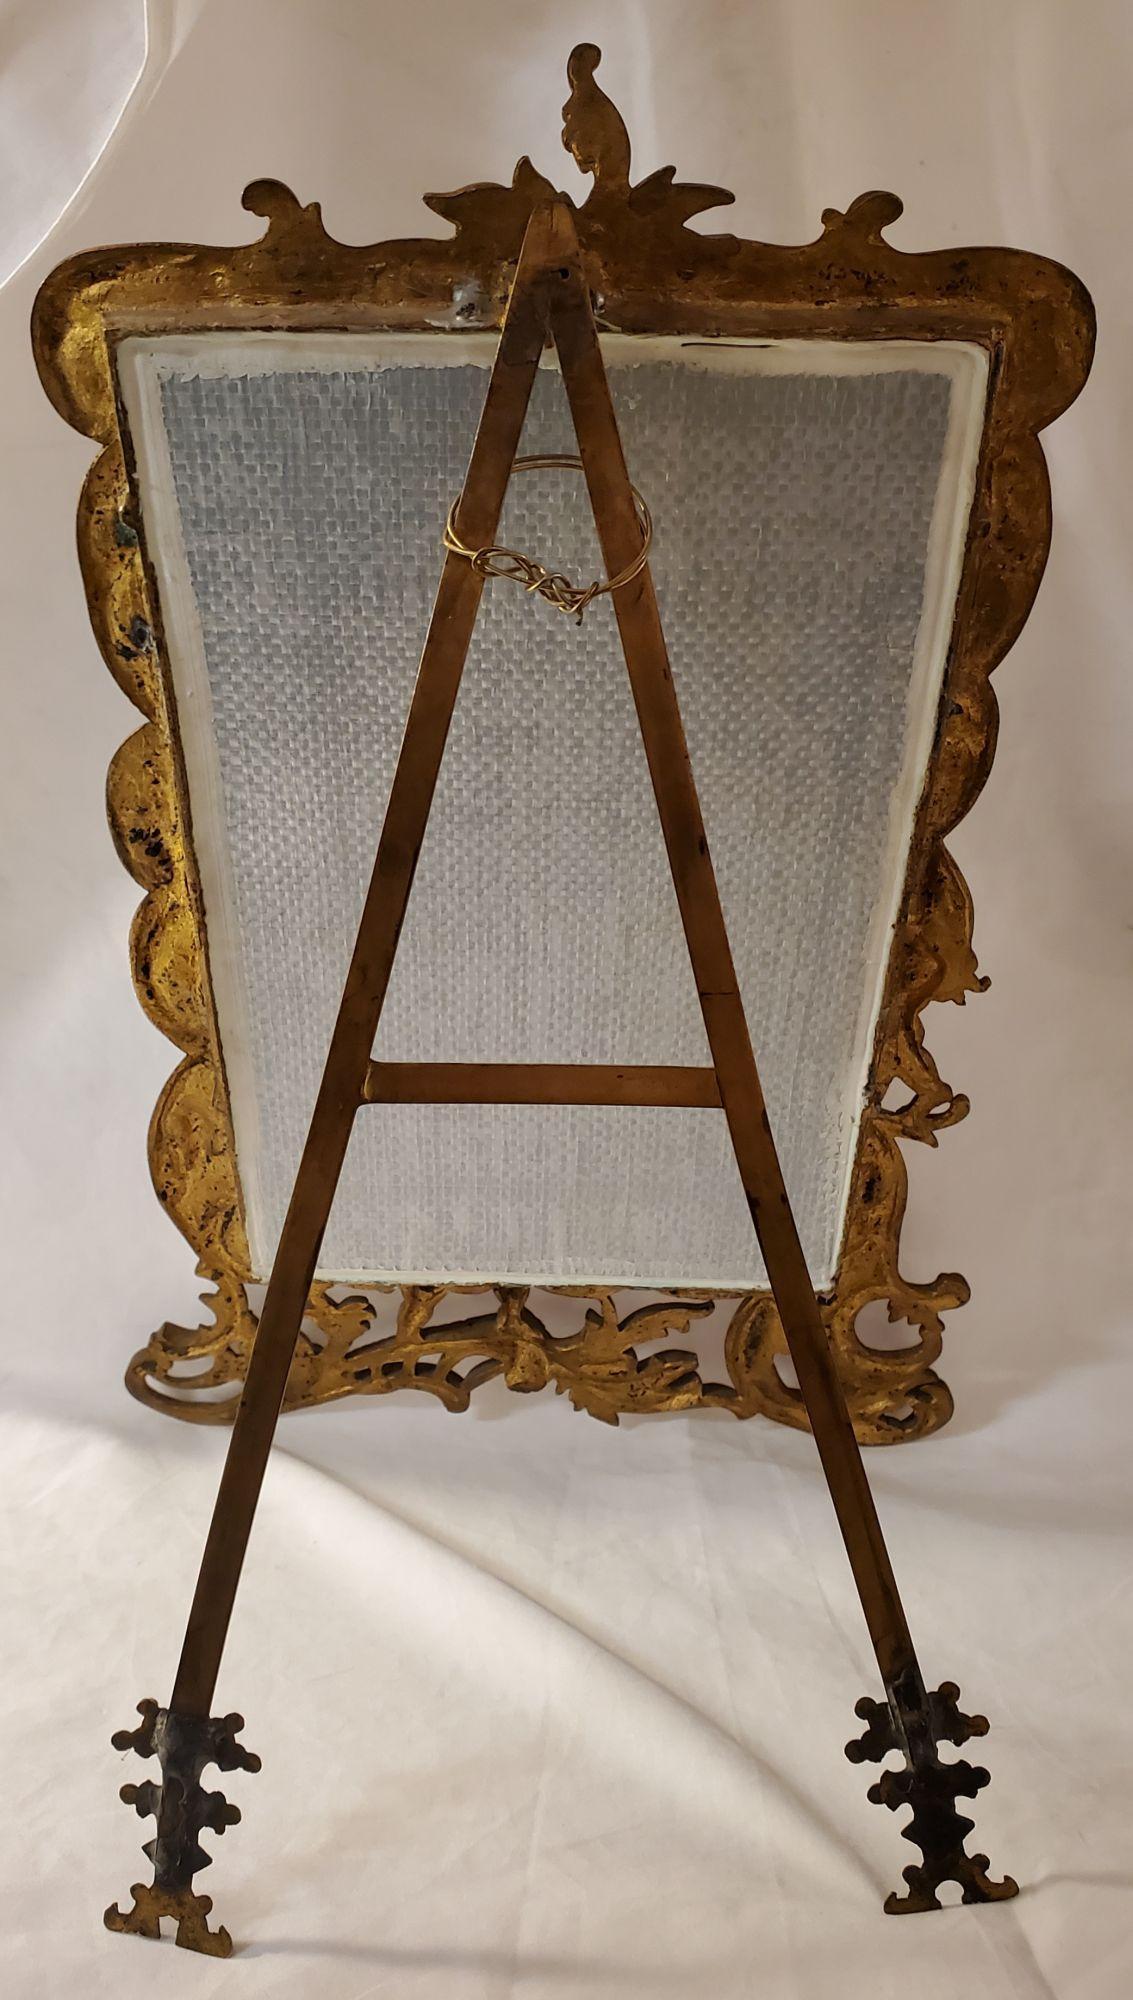 Antique Gilt French Mirror Frame. Wonderful motif of angels in a fight holding spheres. Good vs Evil. This item measures approx. - 18.5 inches high x 12.5 inches wide. when the stand is put and open the item measures approx. 12.5 inches deep. When